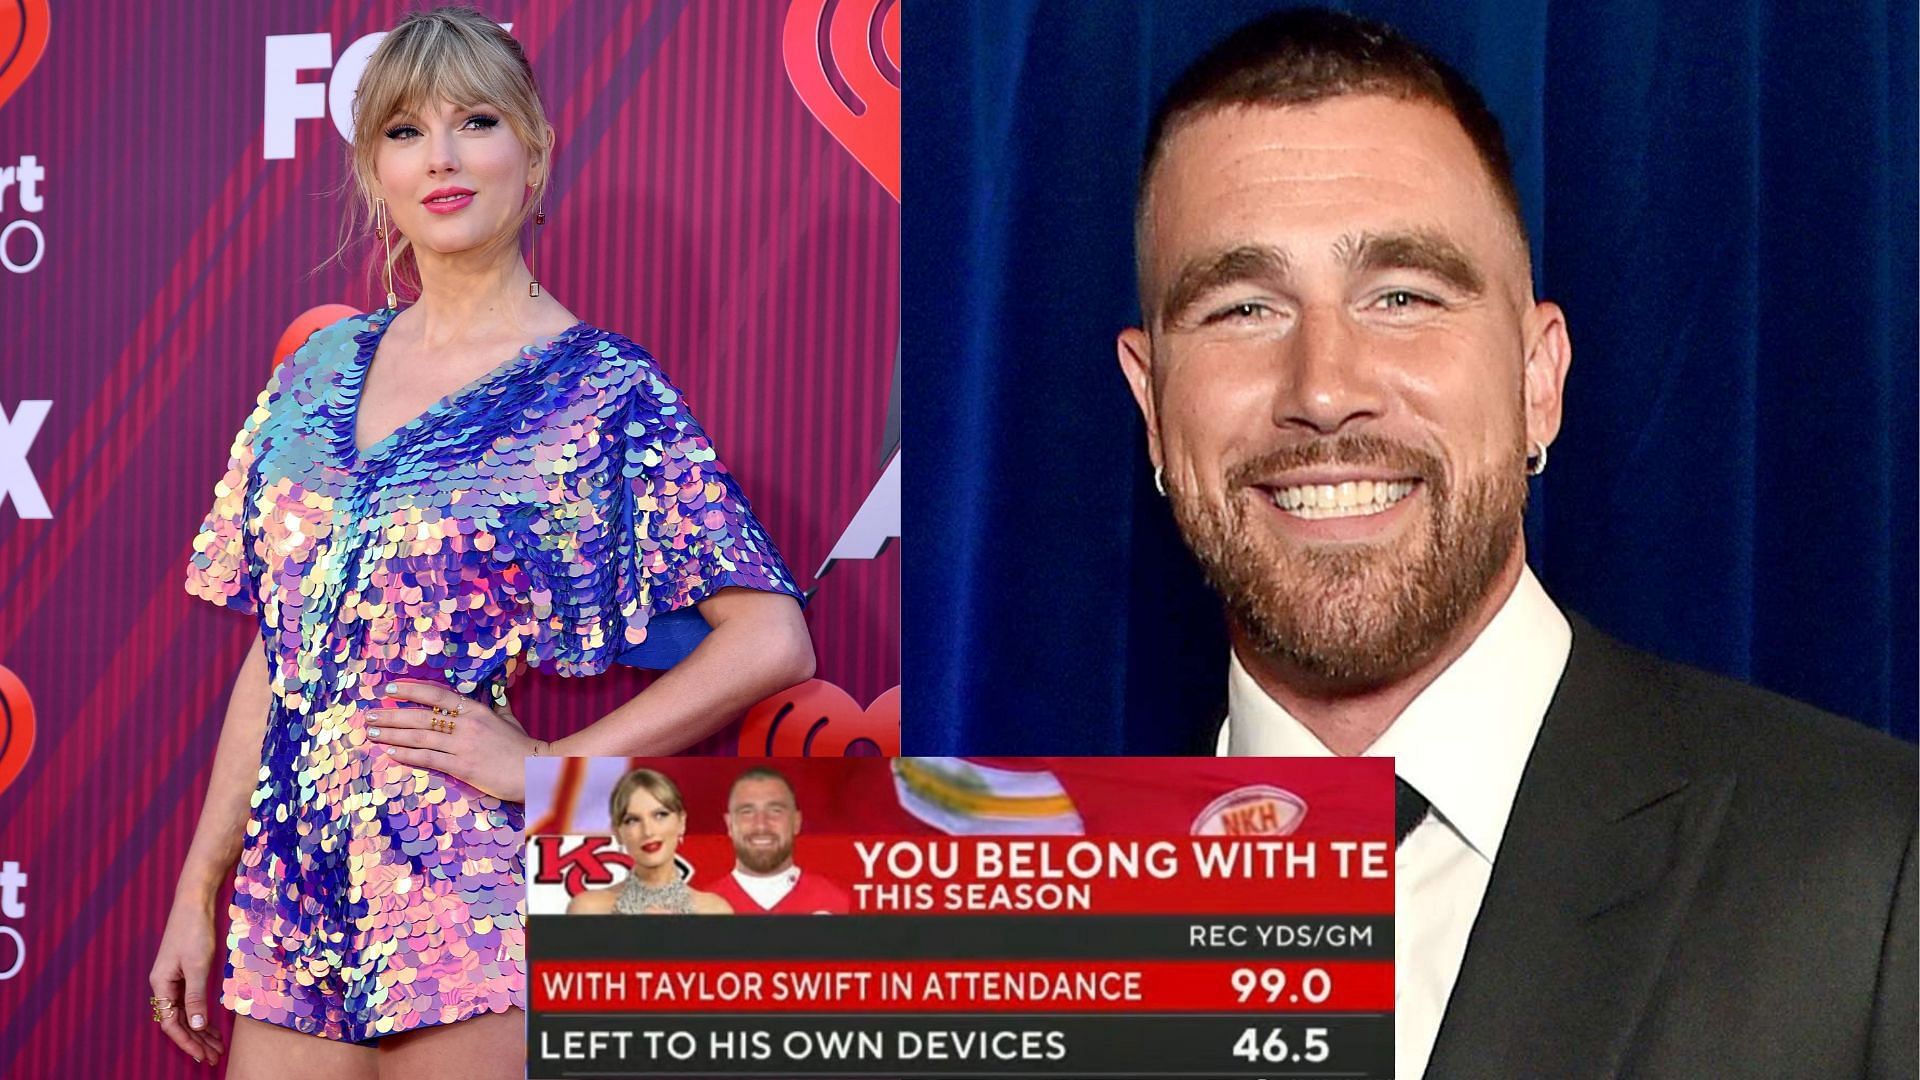 Travis Kelce&rsquo;s stats with Taylor Swift being broadcast has fans riled up